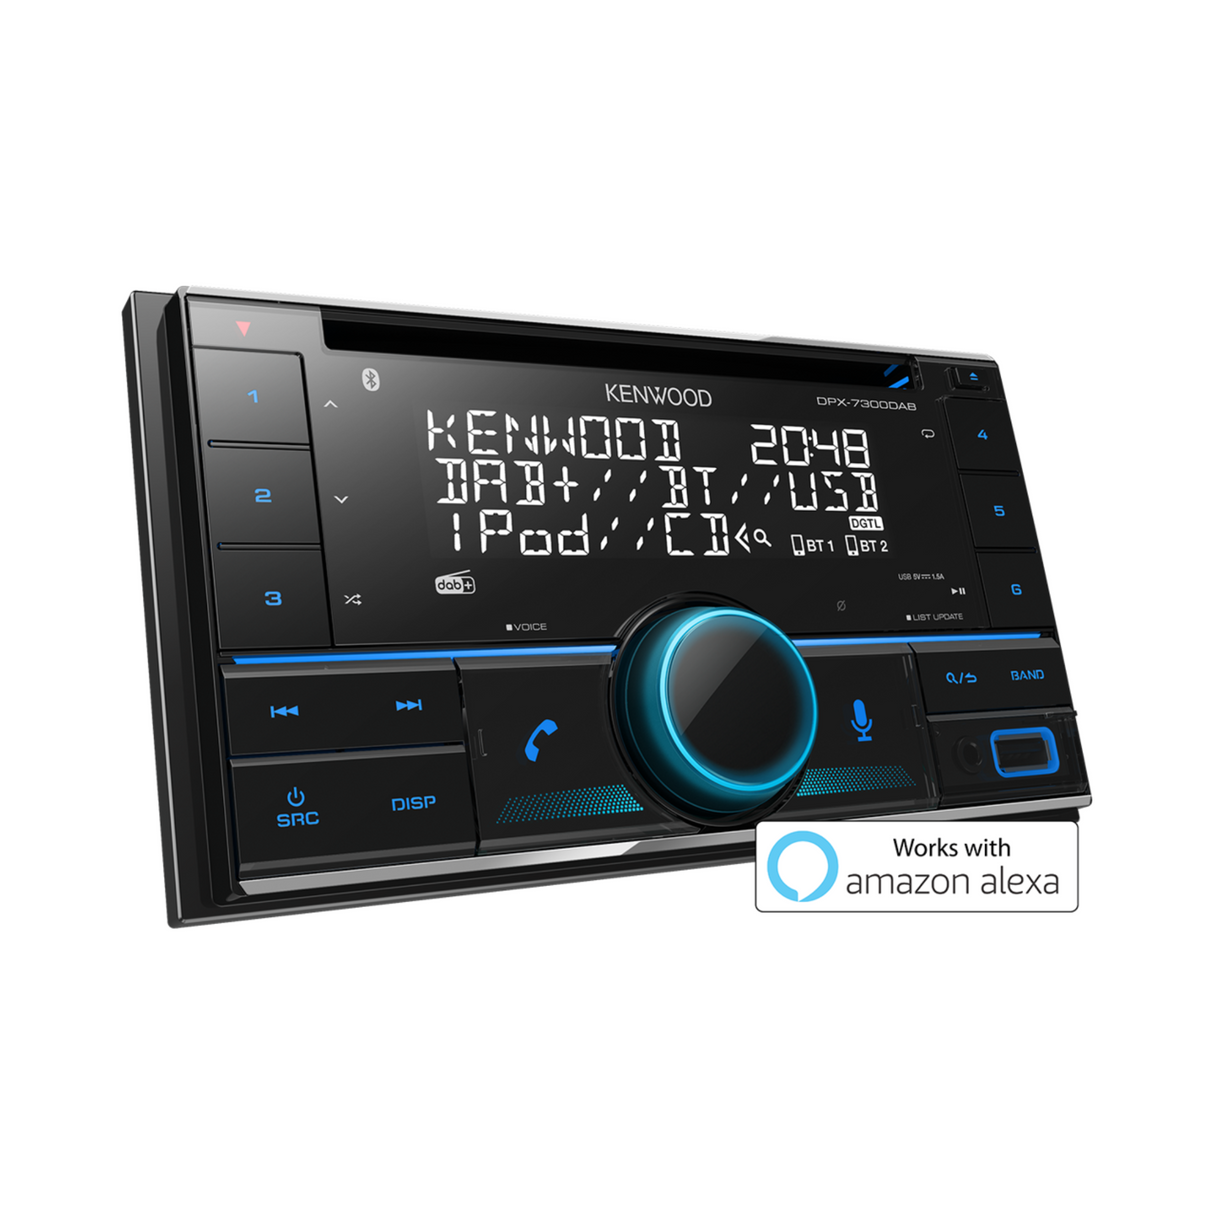 Kenwood DPX7300DAB Car Stereo with Bluetooth Handsfree DAB and Amazon Alexa